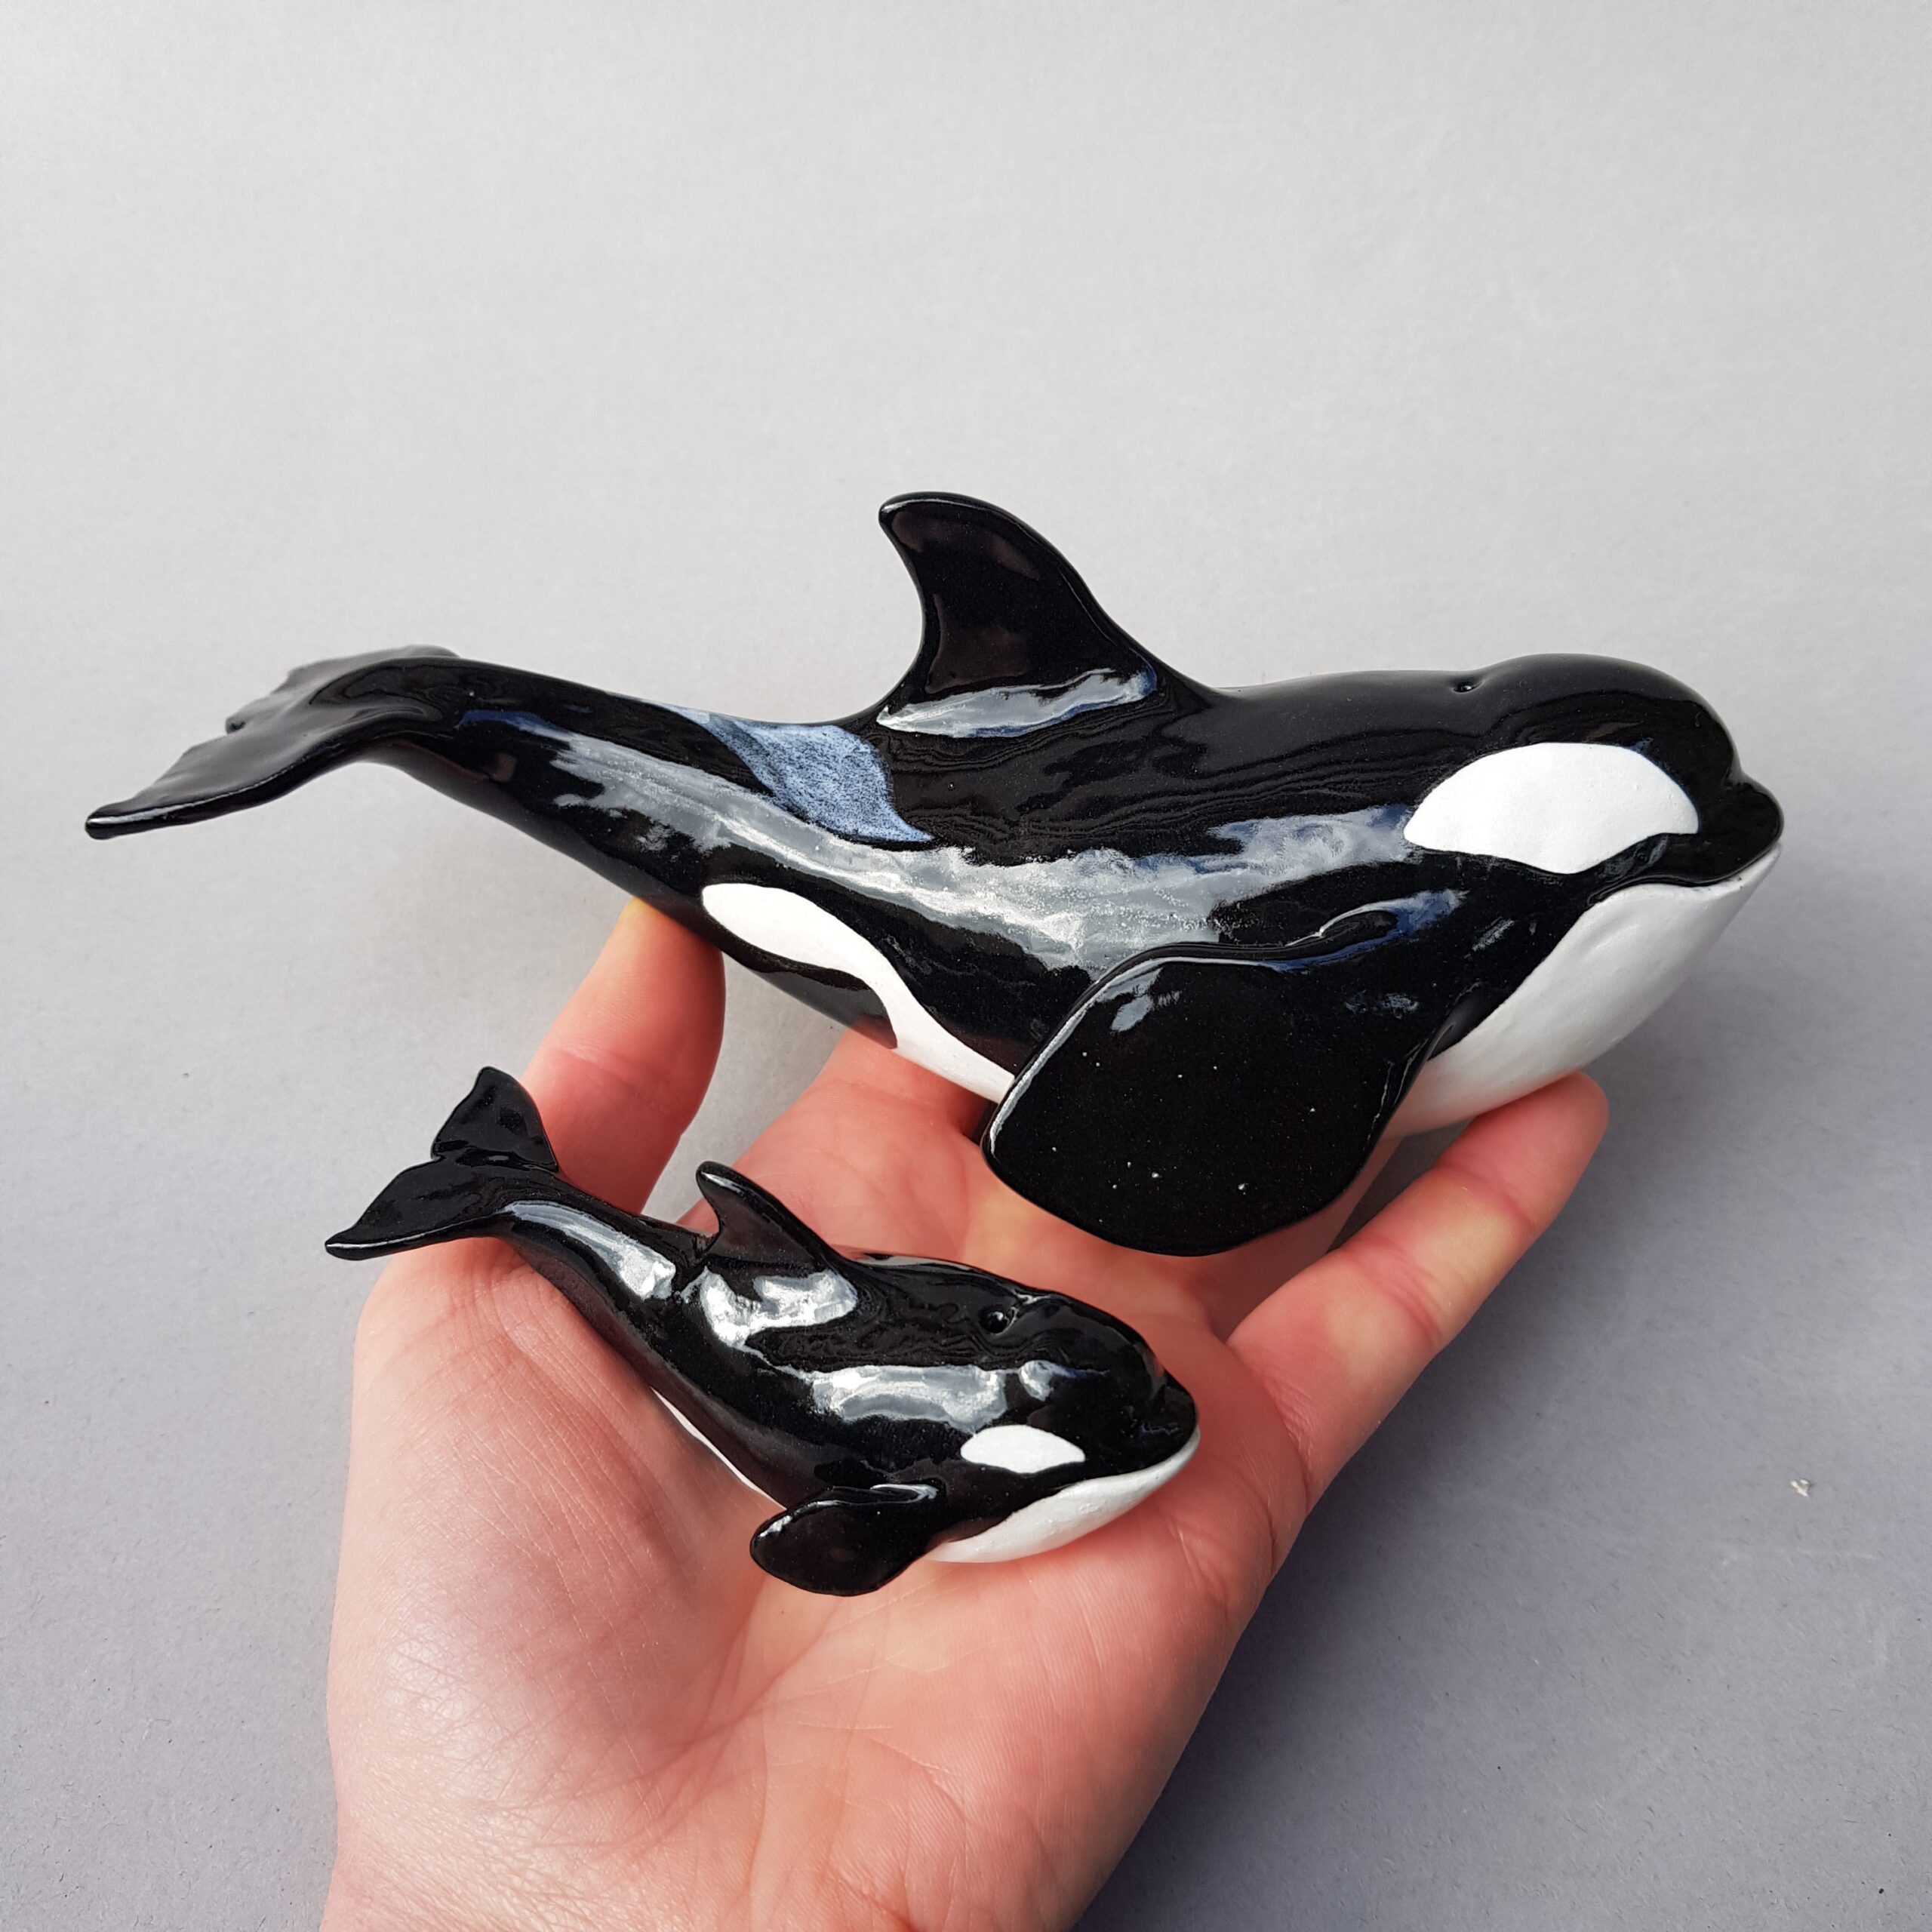 Ocra/Killer Whale with Calf